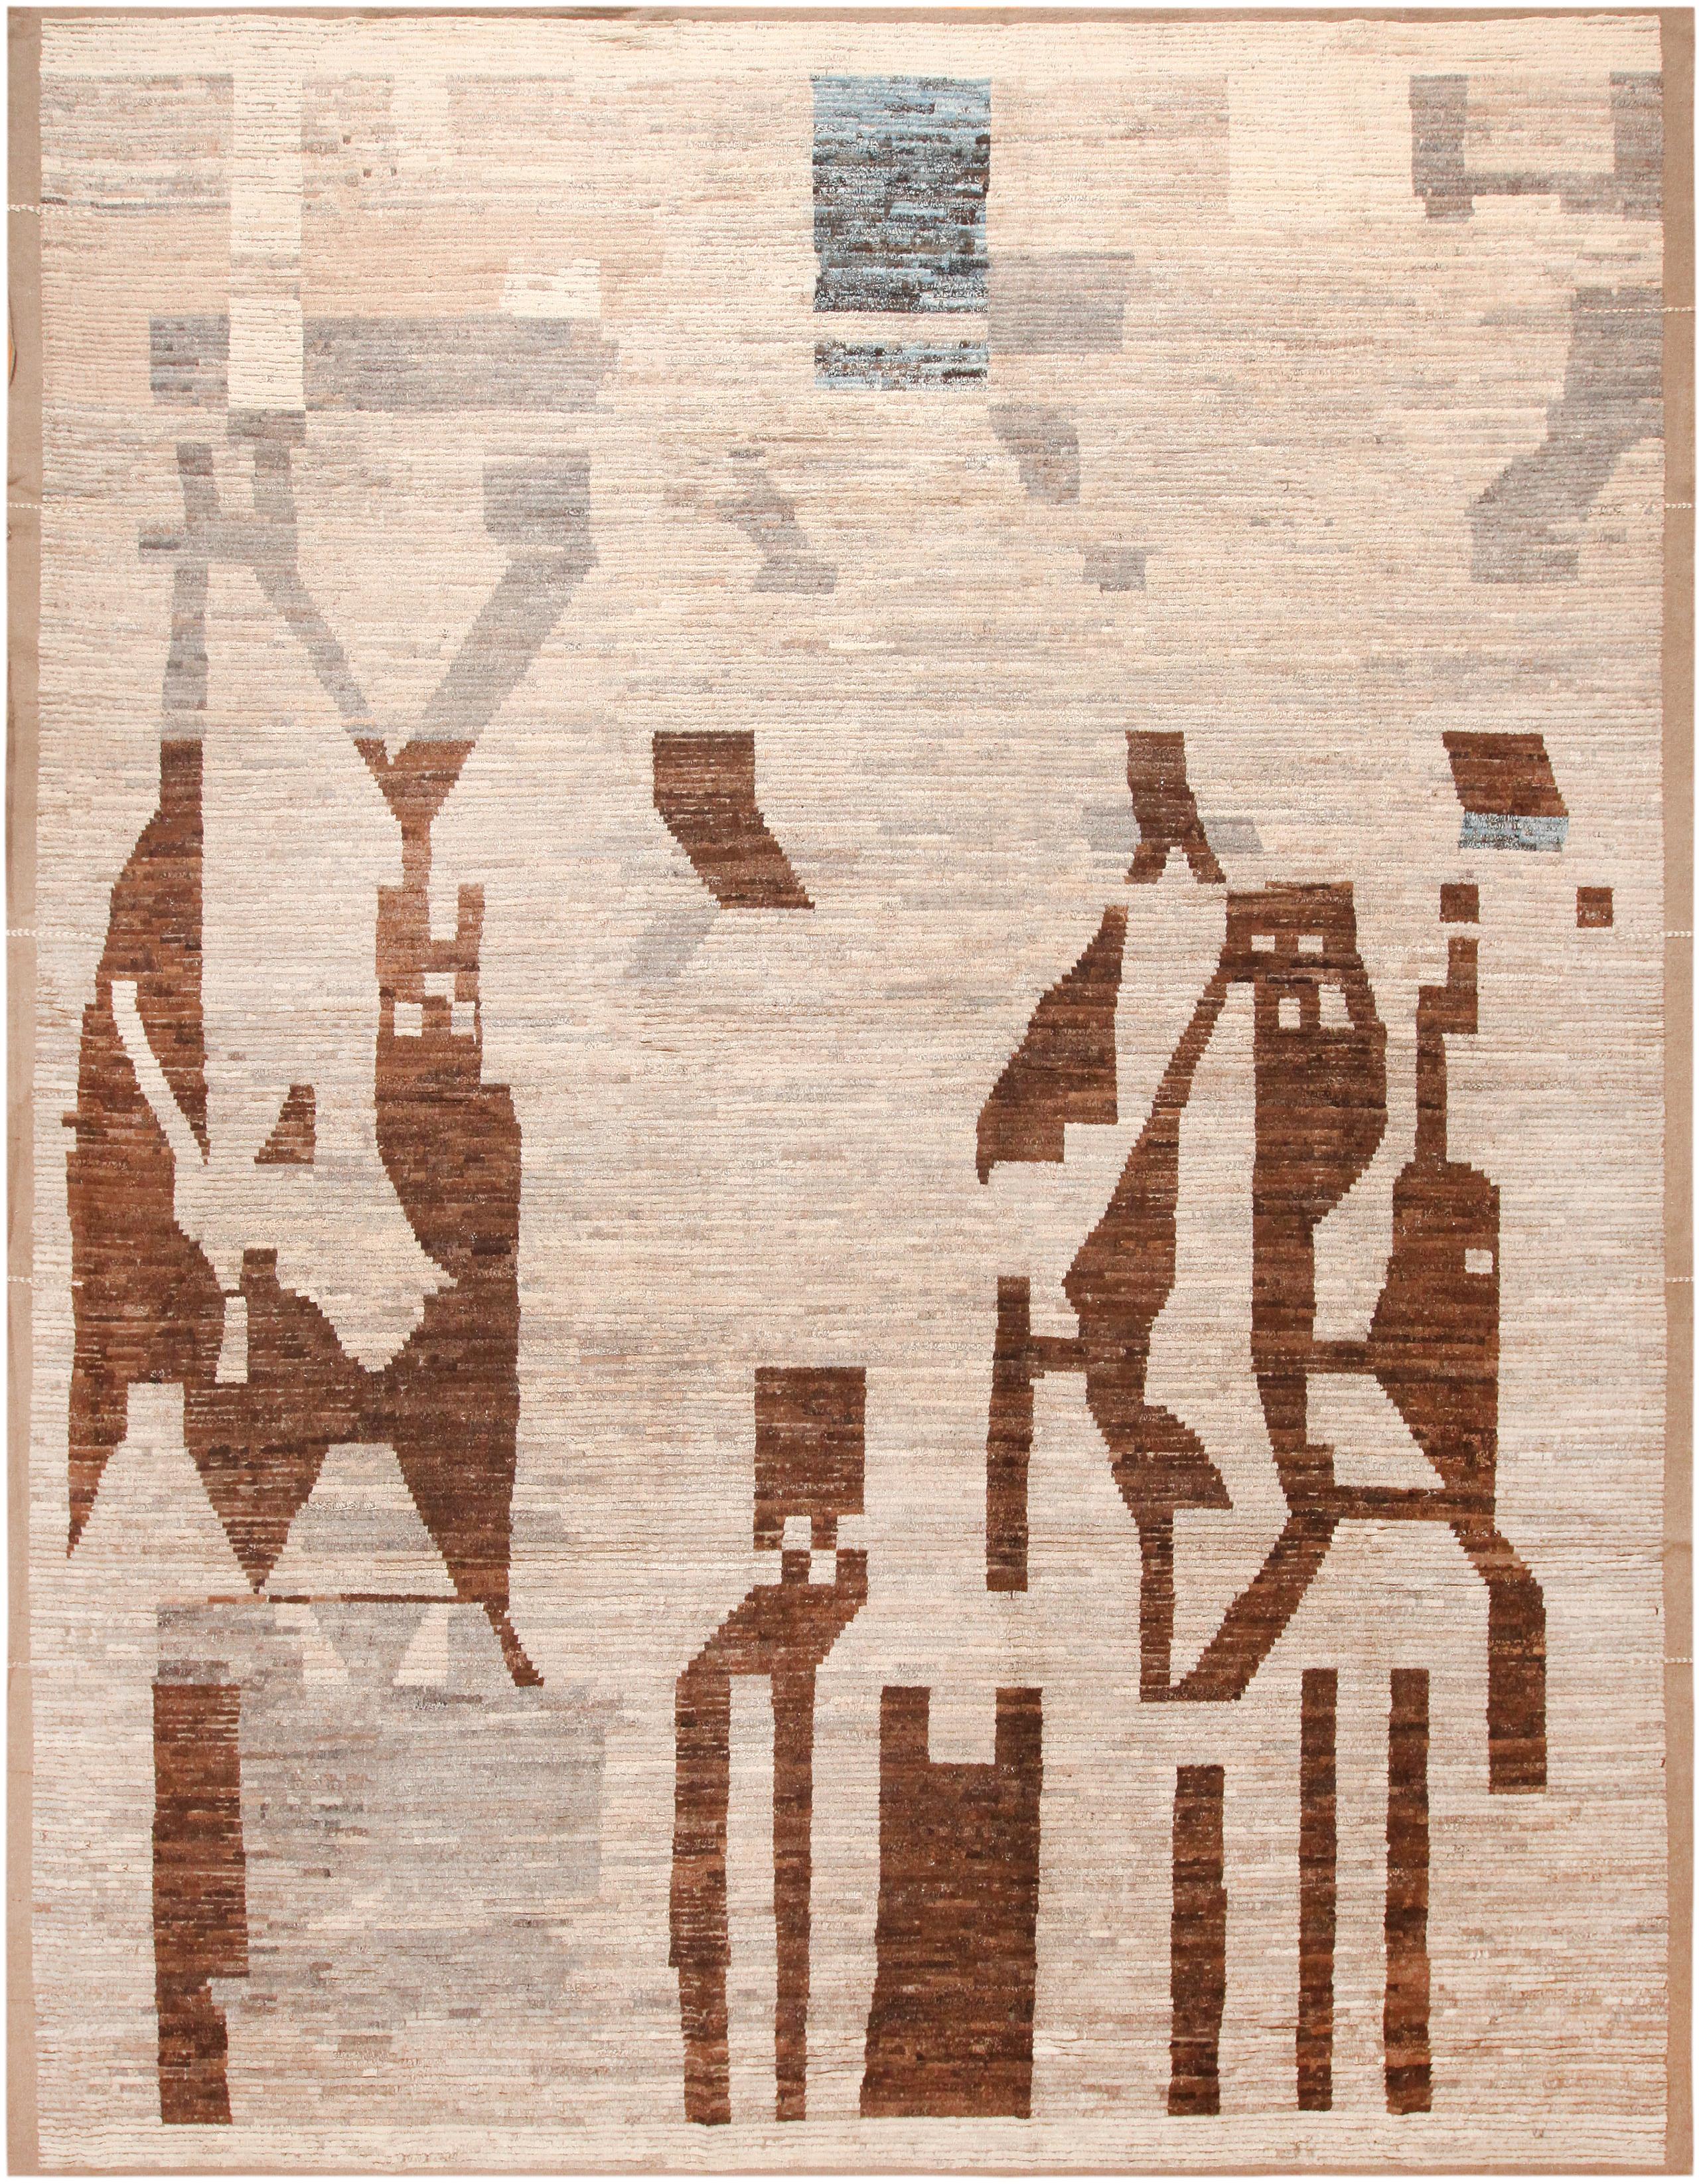 Gorgeous Large Abstract Primitive Design Modern Area Rug, Country of Origin: Central Asia, Circa date: Modern Rugs – Today’s styles continue to energy in ways that combine remnants of our primitive past with contemporary elements. The result is